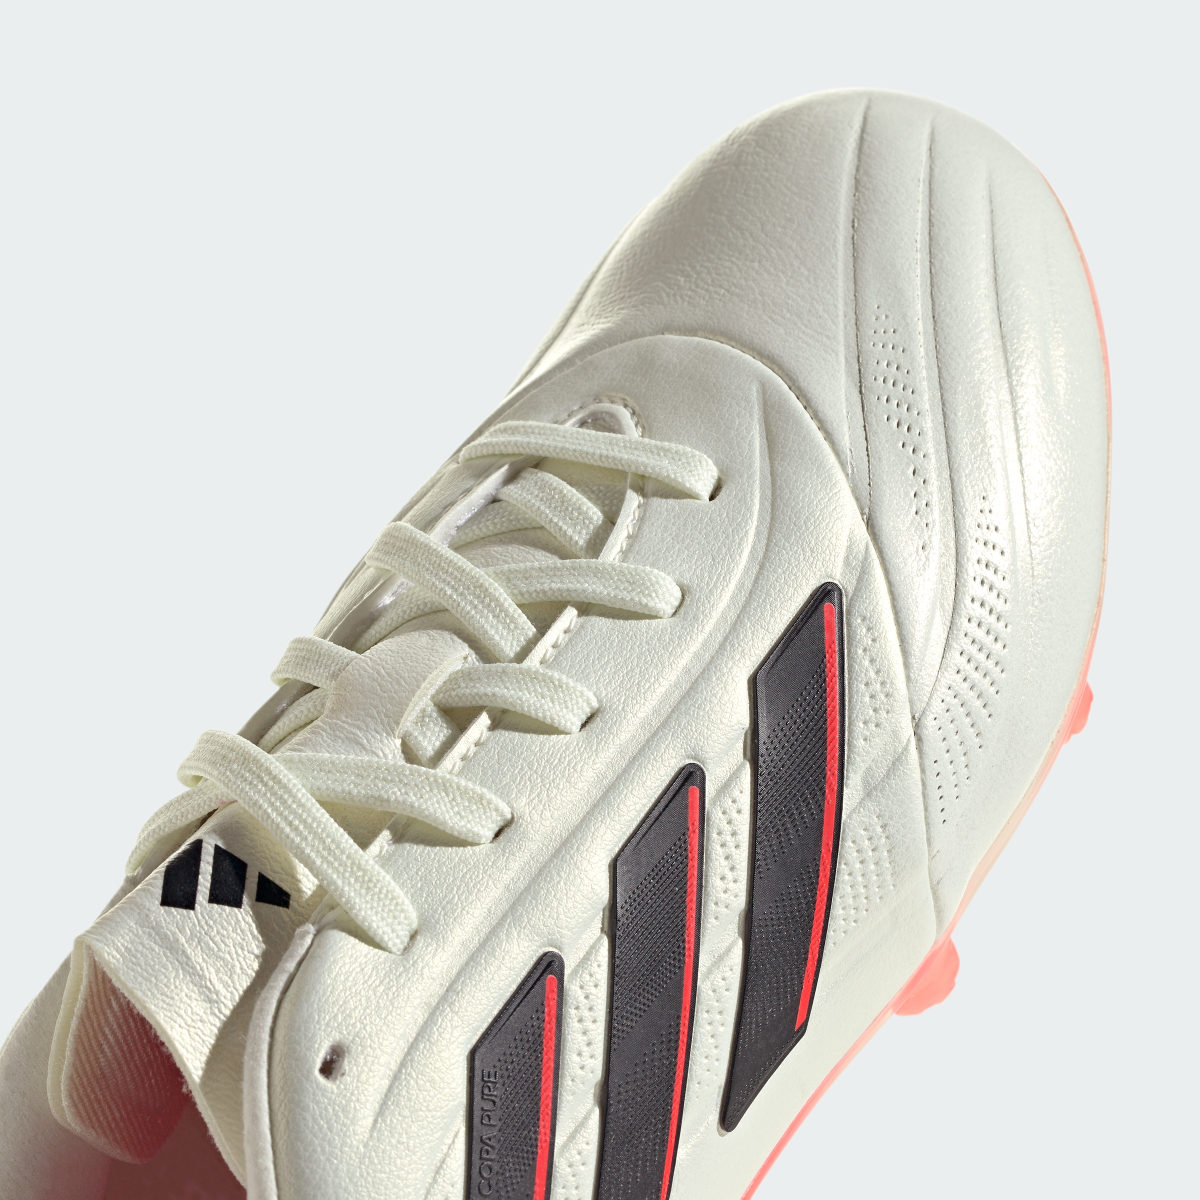 Adidas Copa Pure II Elite Firm Ground Cleats. 10